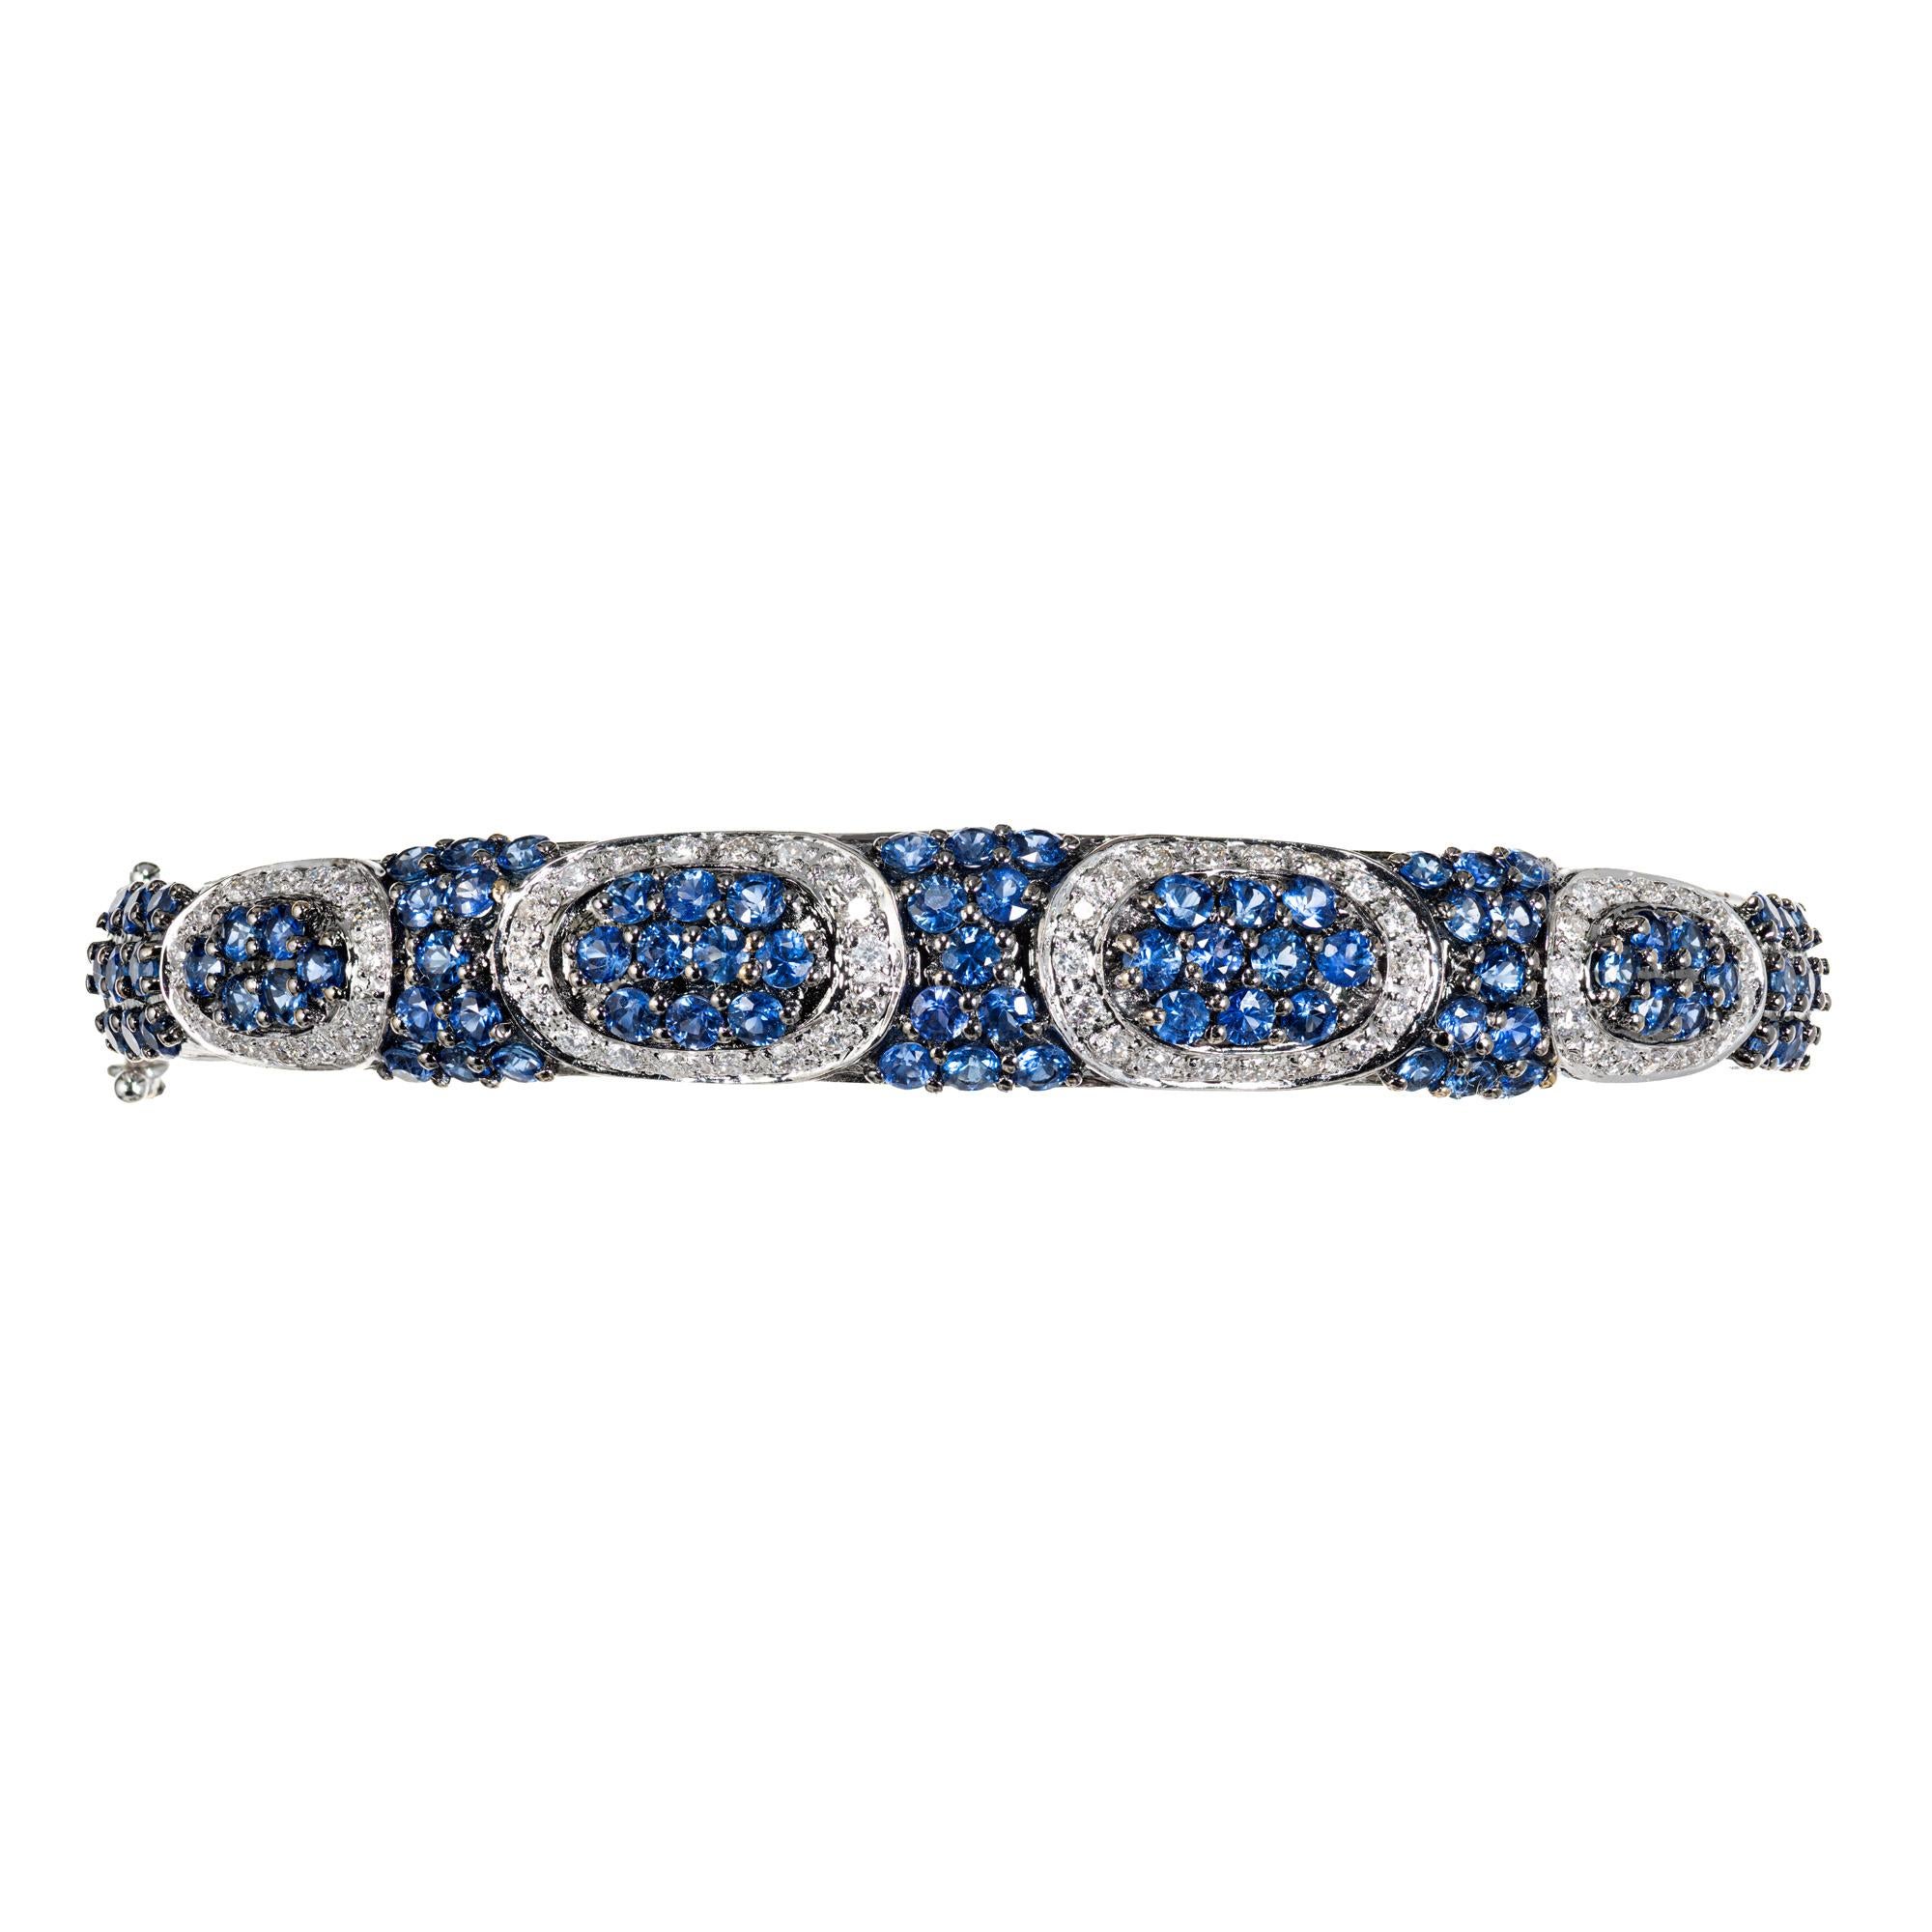 Sapphire and diamond bangle bracelet. 83 round sapphires totaling 4.15cts, set in a 18k white gold bangle setting. The clustered sapphires are separated buy buy 72 full cut round diamonds approximately .50cts, in white gold ovals. The bangle fits a